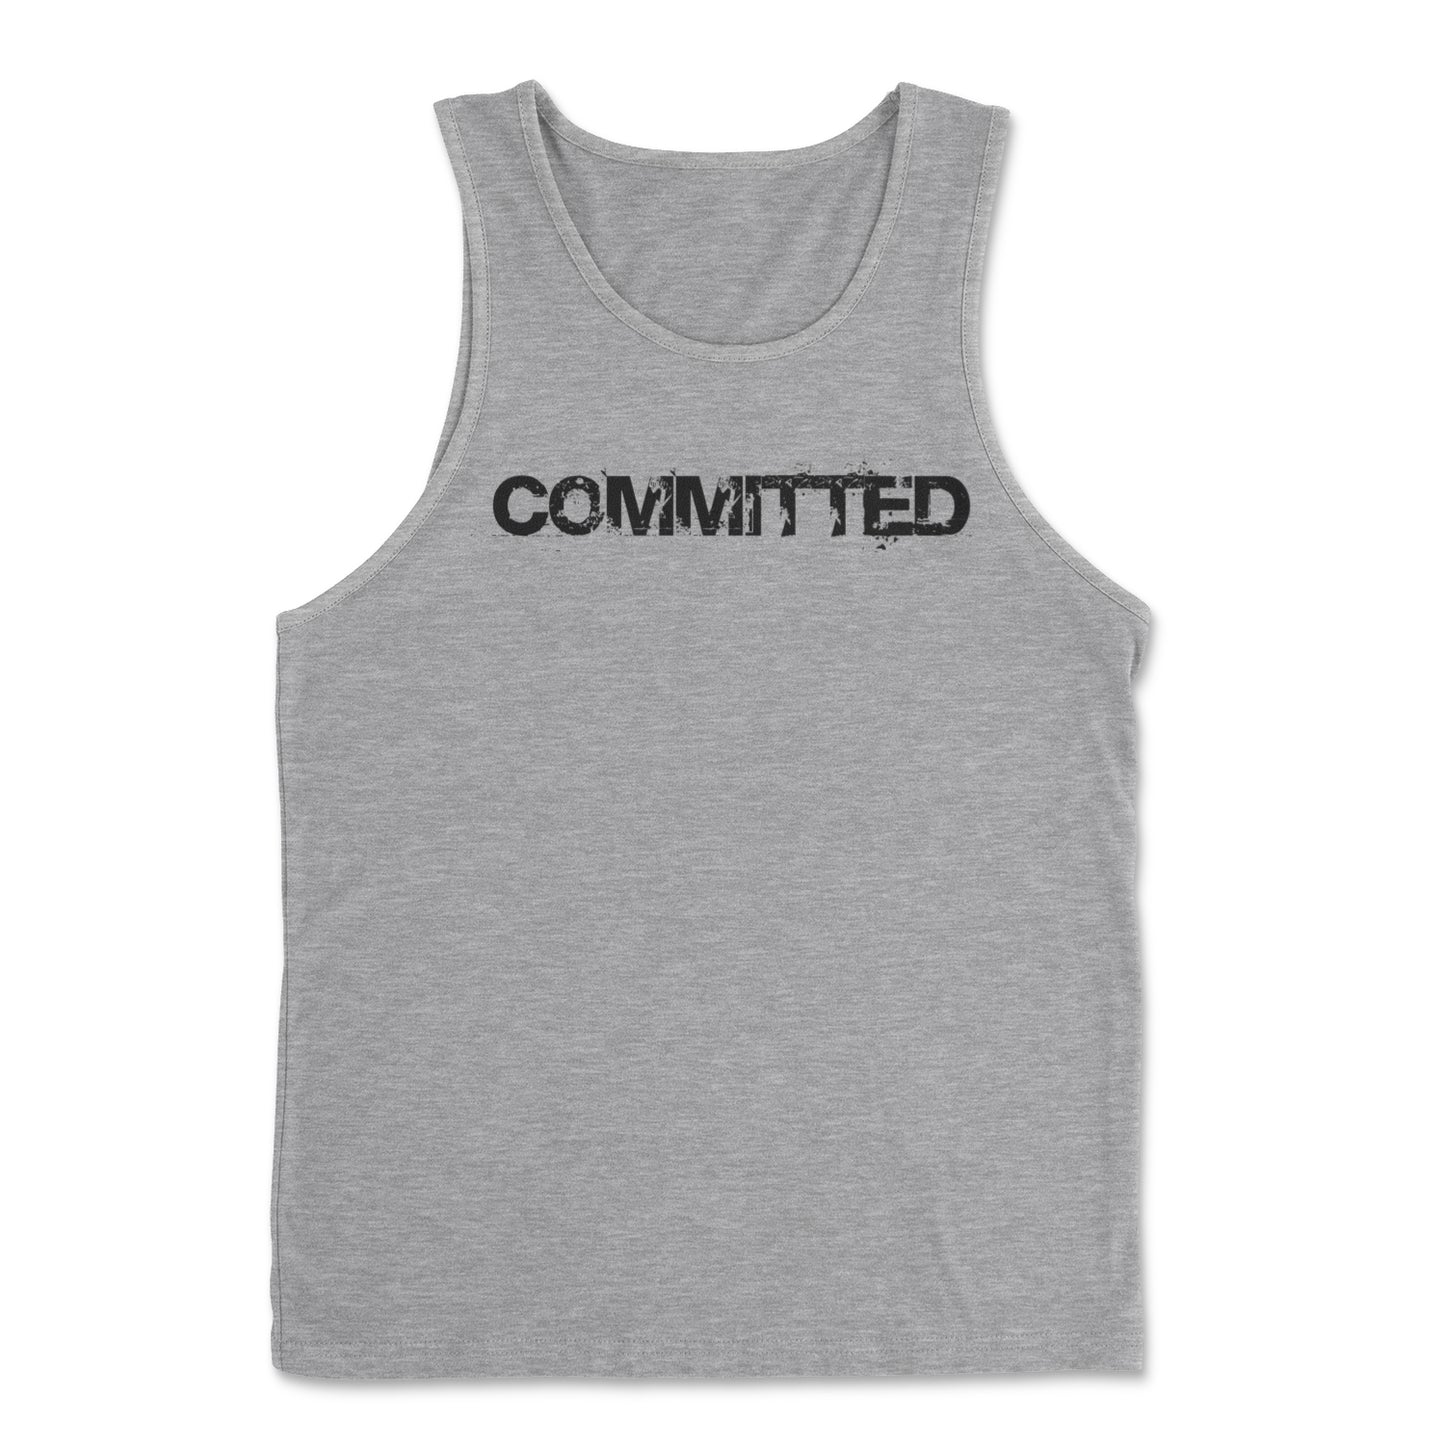 COMMITTED Tank